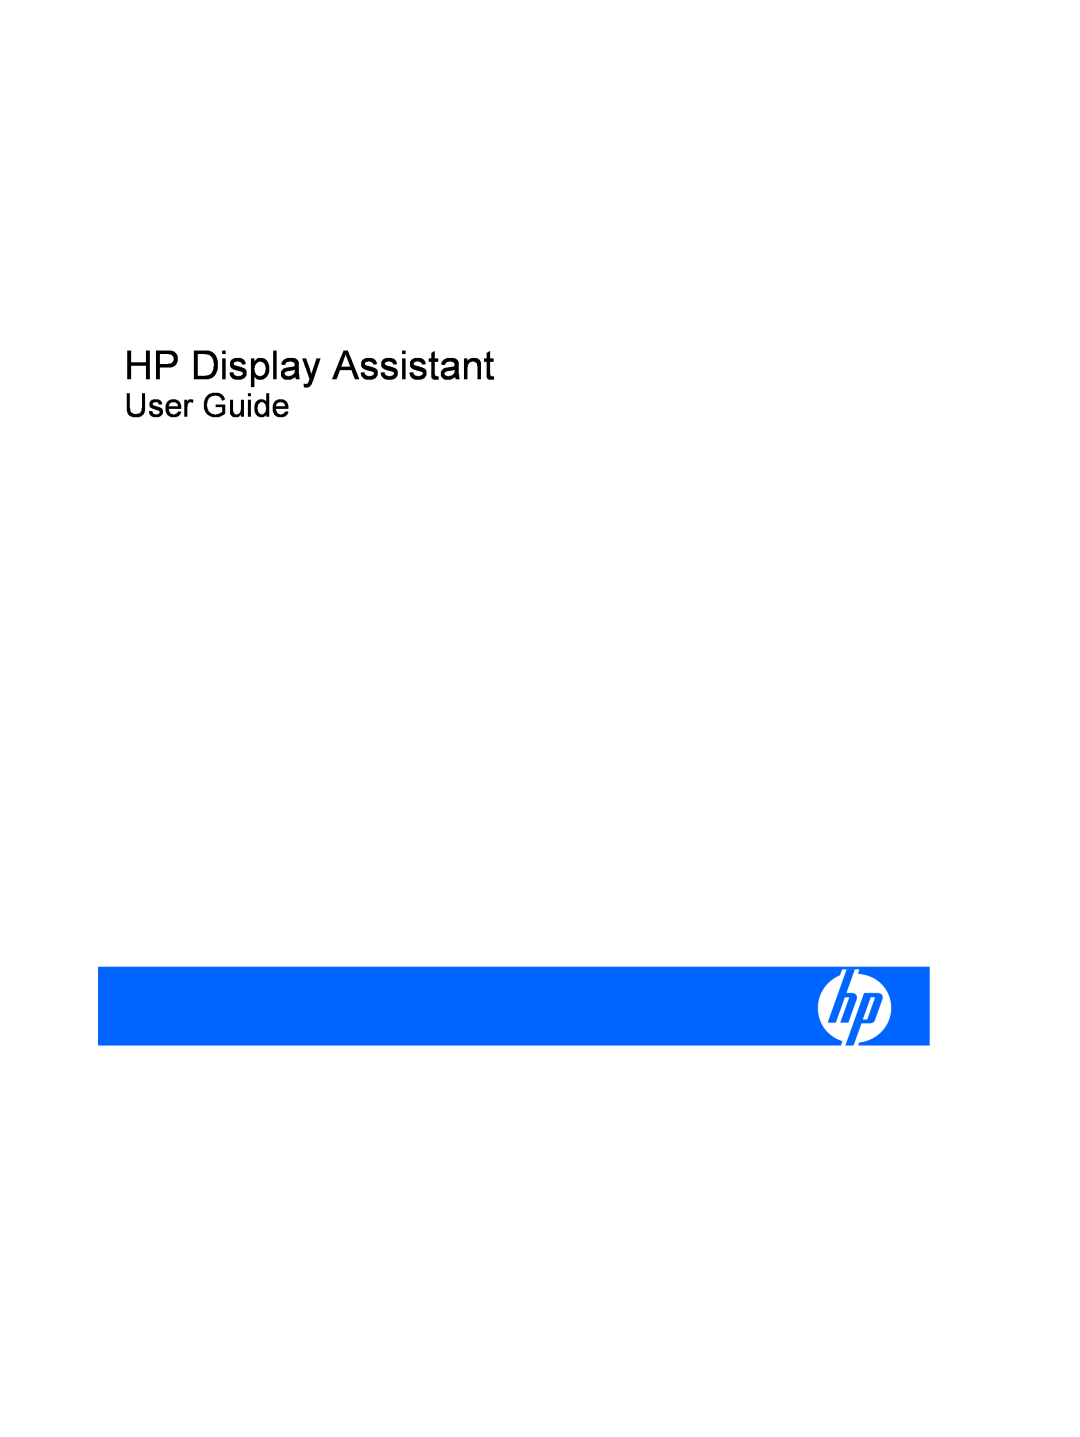 HP L1950 19-inch manual HP Display Assistant, User Guide 